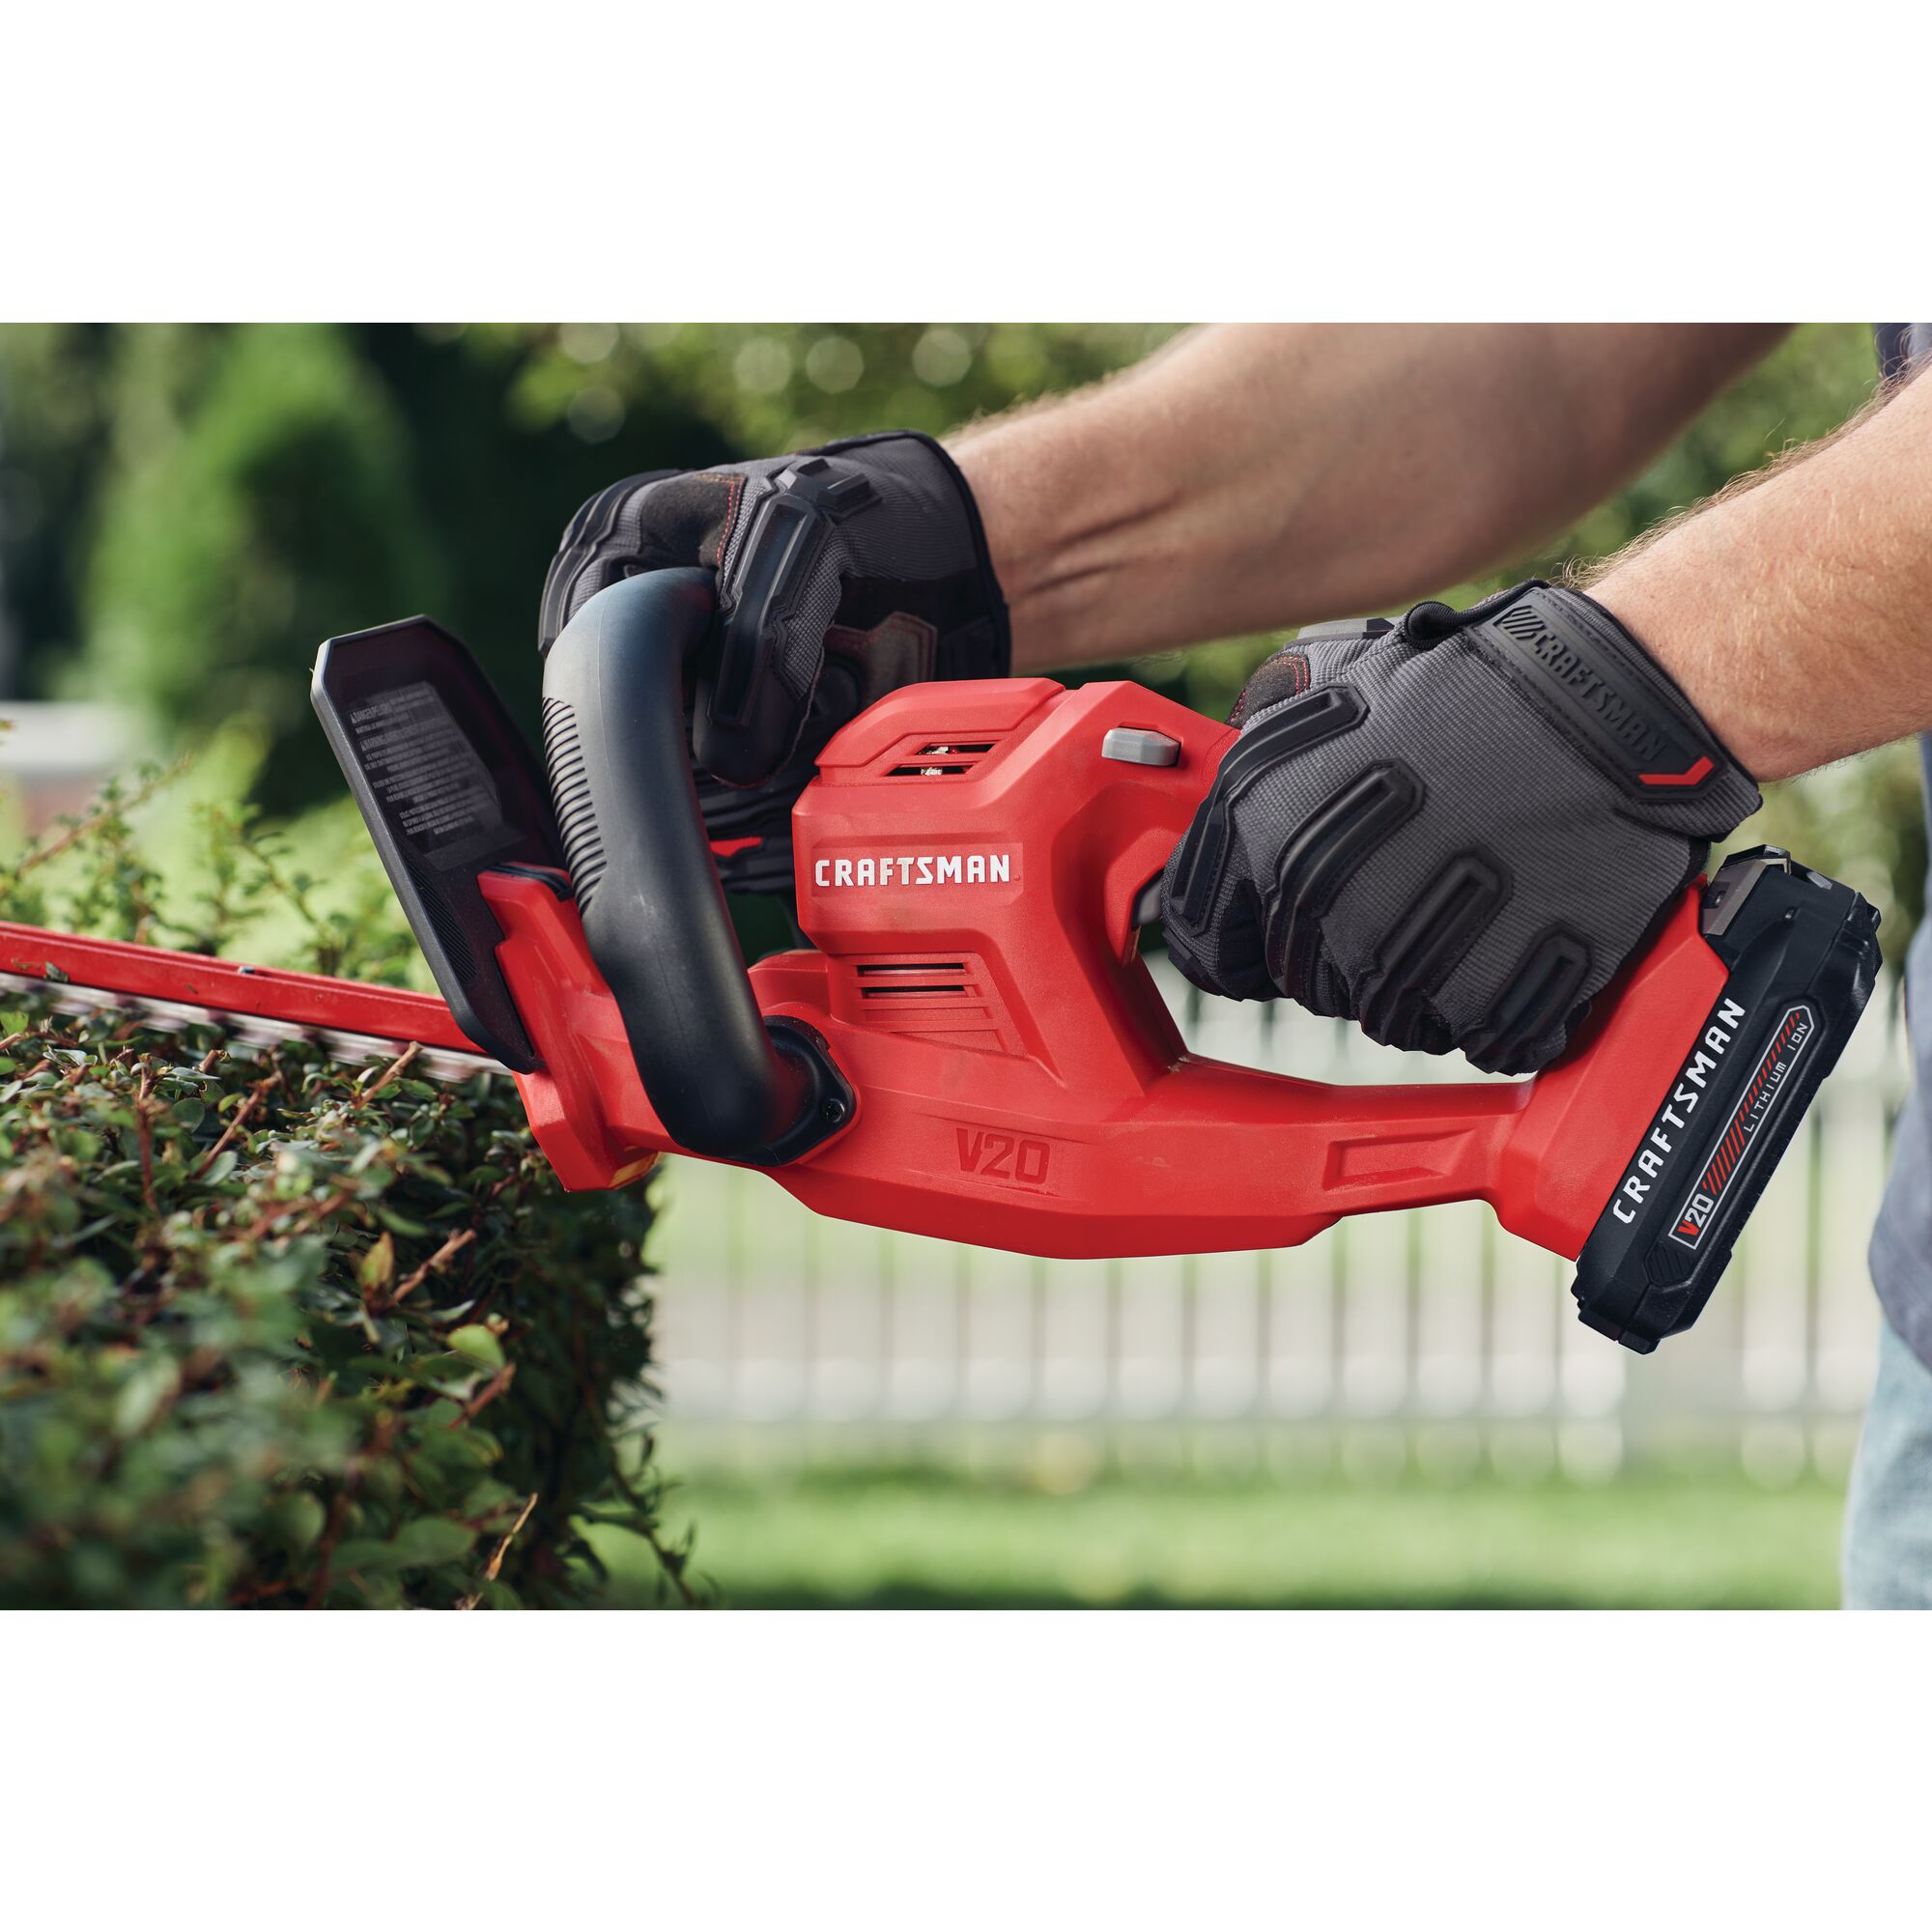 Cordless 20 inch hedge trimmer being used to level hedge.